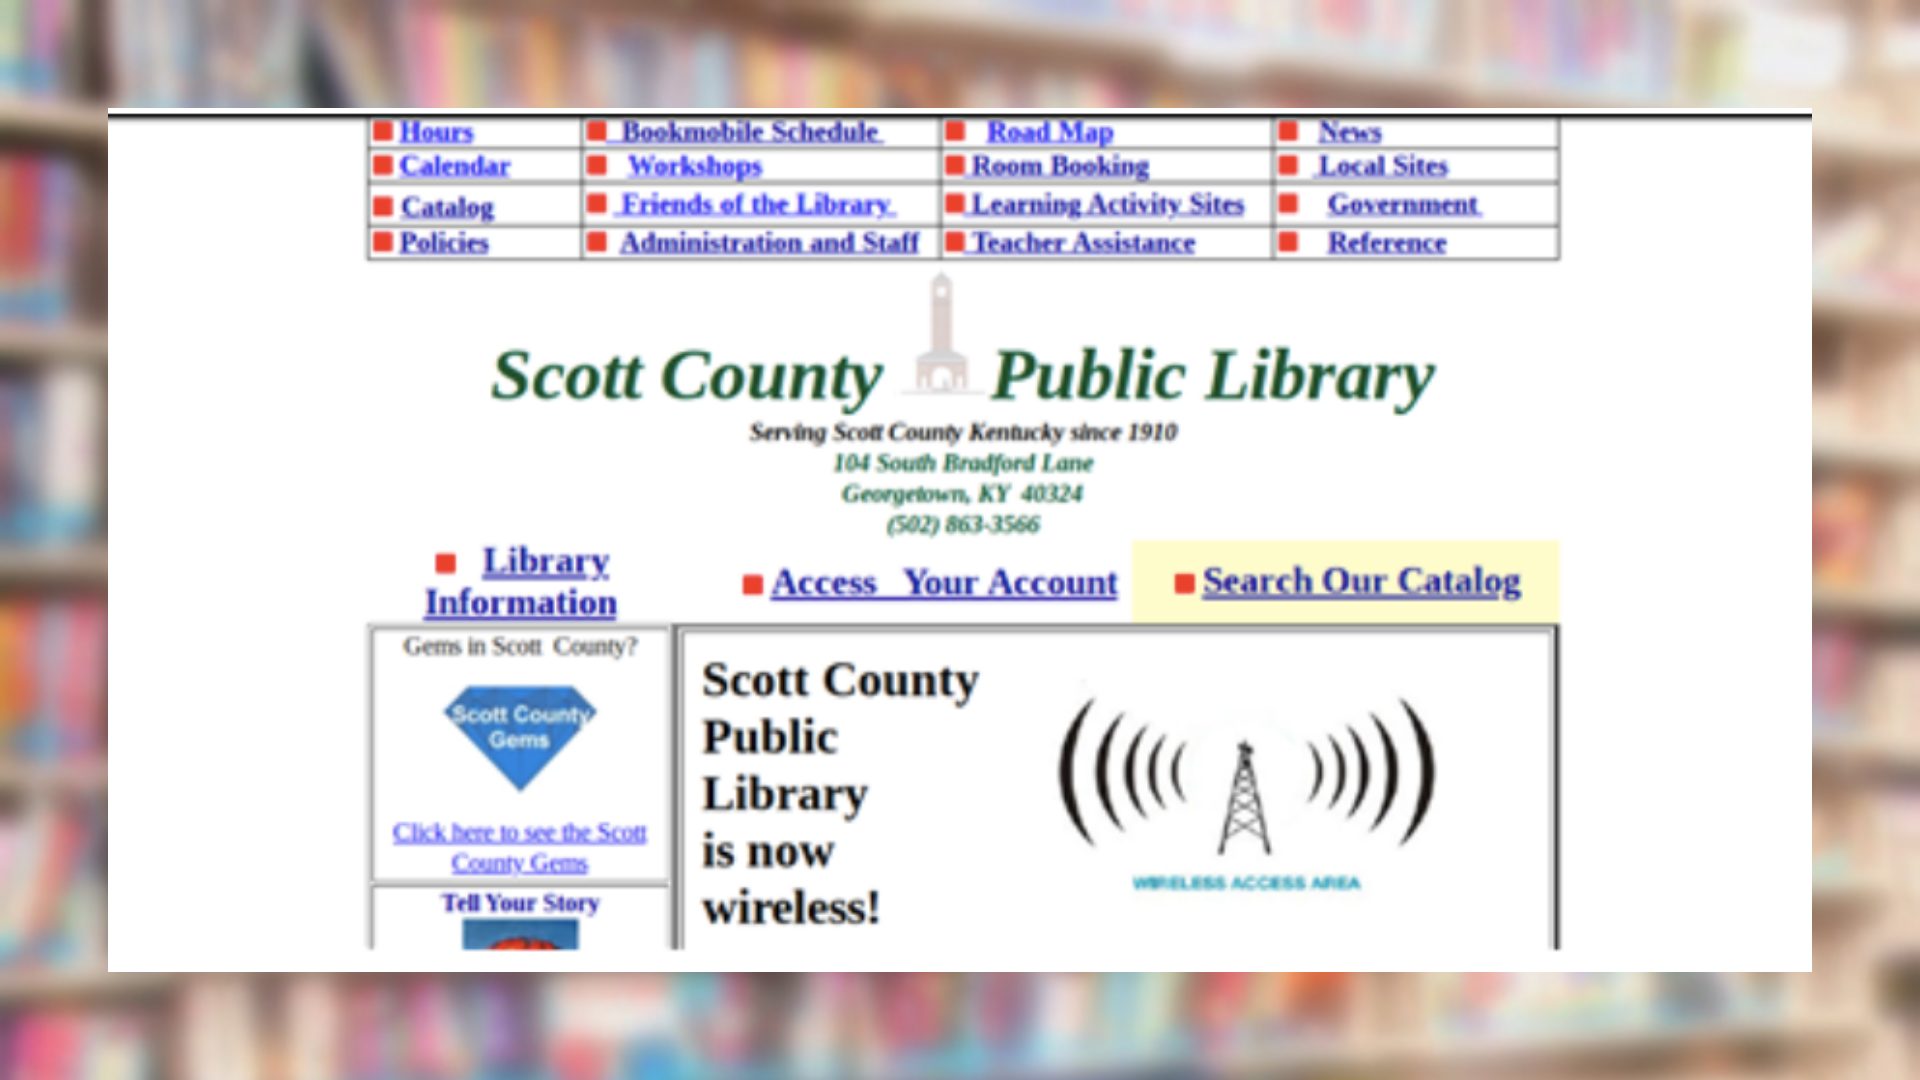 Scott County Public Library Archived Website in 2007